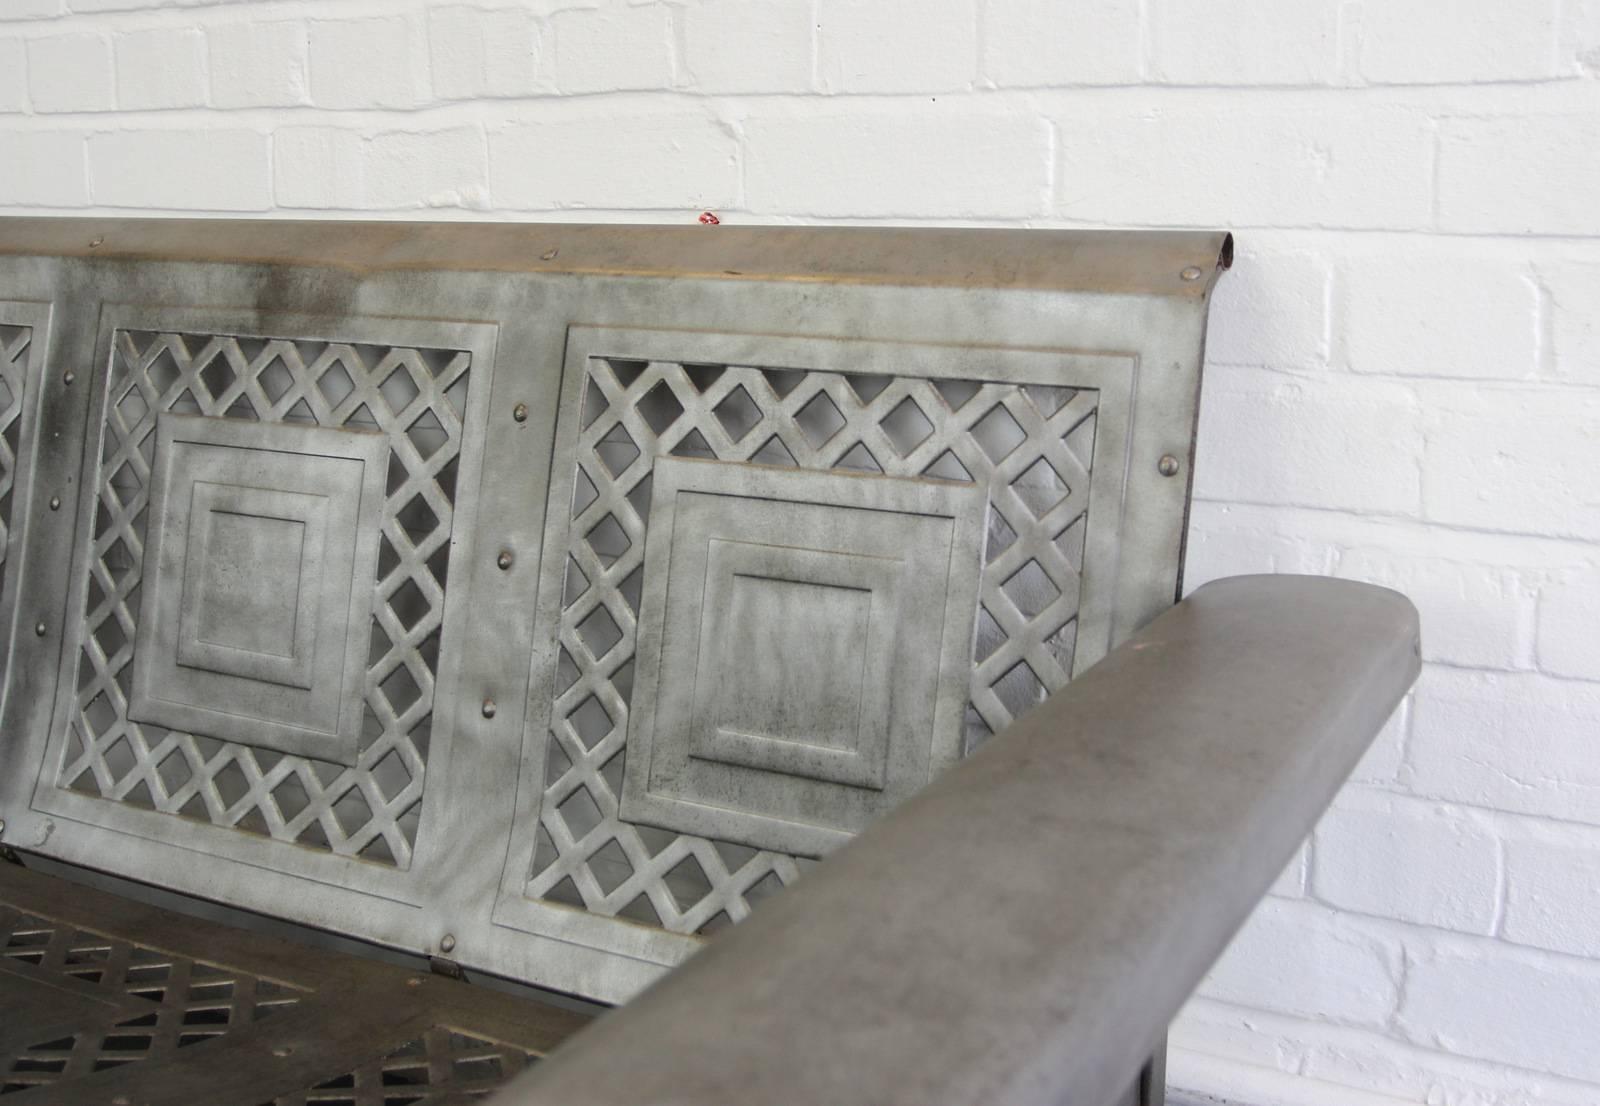 Steel porch bench by The Bunting Glider Co., circa 1930s

Product code #OA526

- Curved sheet steel
- Embossed makers mark on both side panels
- American, circa 1930s
- 164cm long x 64cm deep x 73cm tall
- 32cm from the floor to the